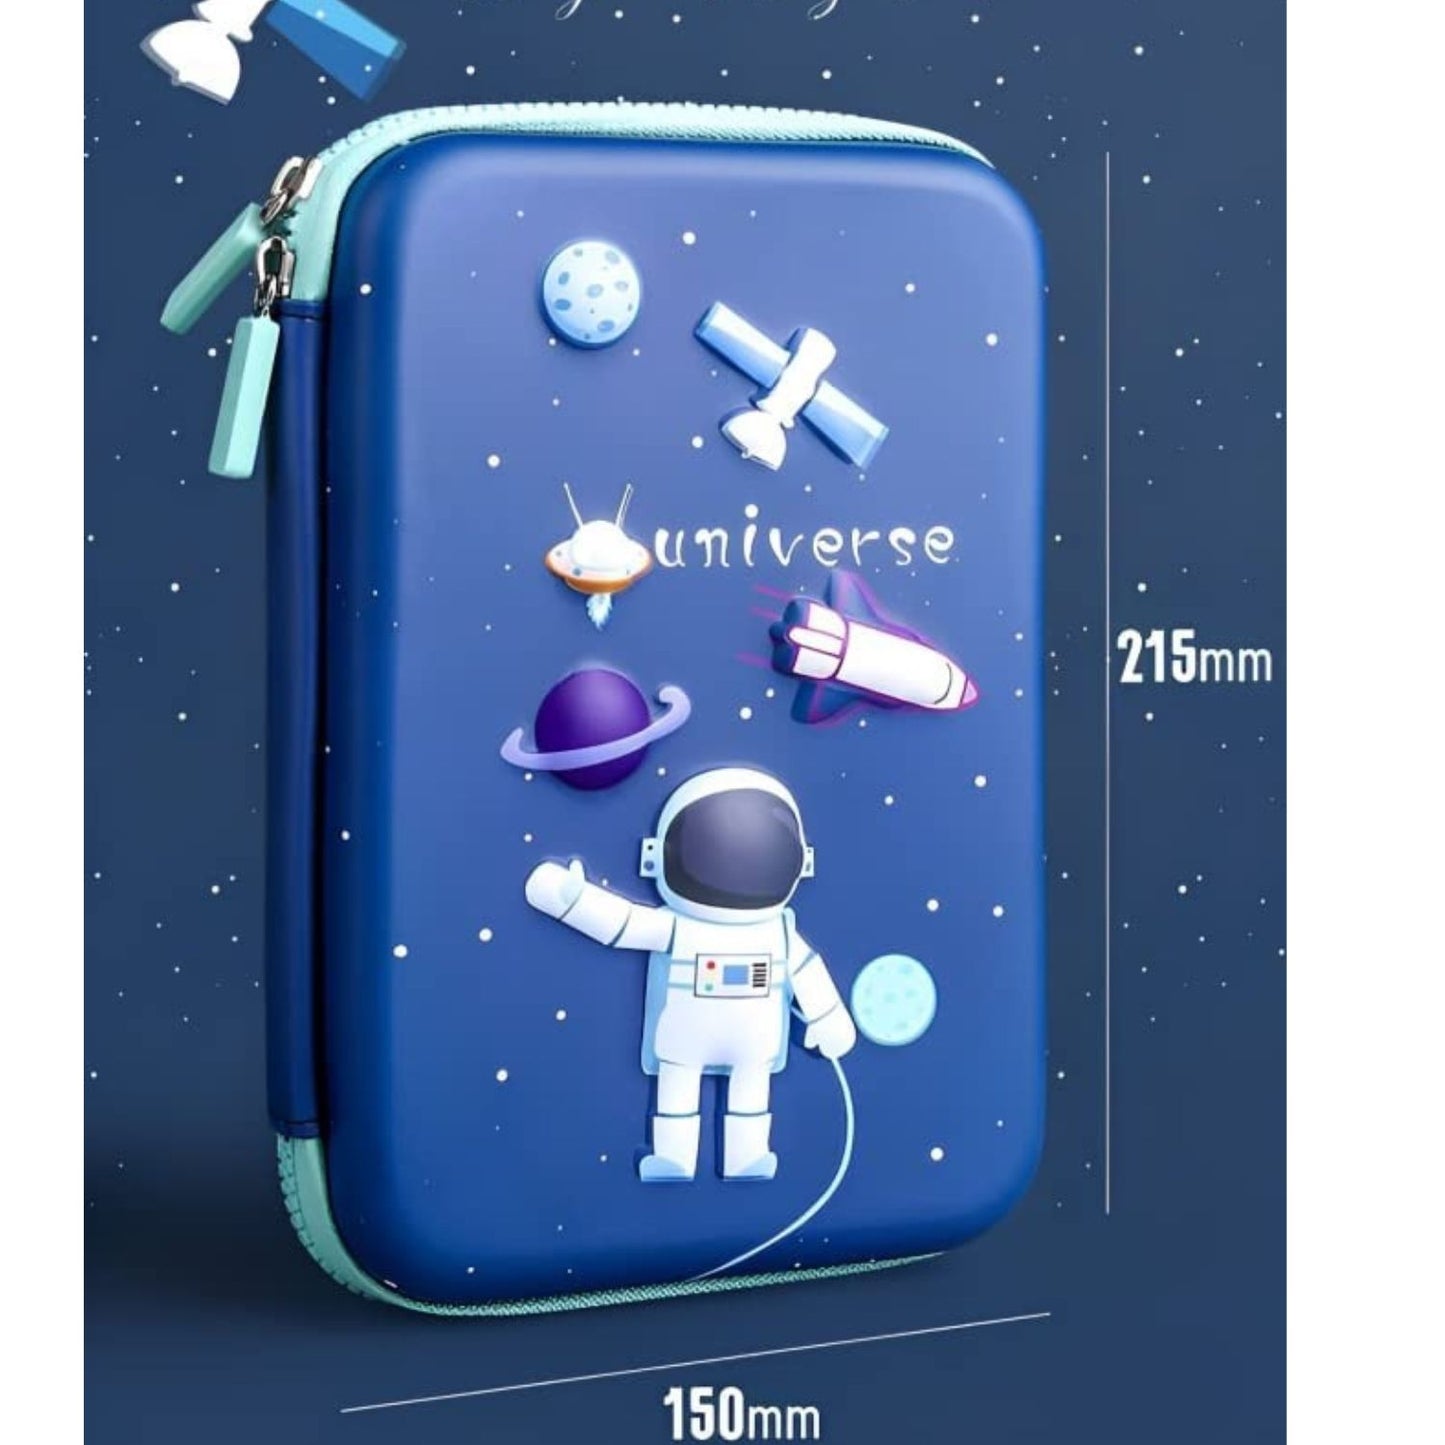 MM TOYS 3D Space Design Embossed EVA Cover Pencil Case with Compartments, Pencil Pouch for Kids, School Supply Organizer for Students, Stationery Box, Zip Pouch Bag (1 Unit)